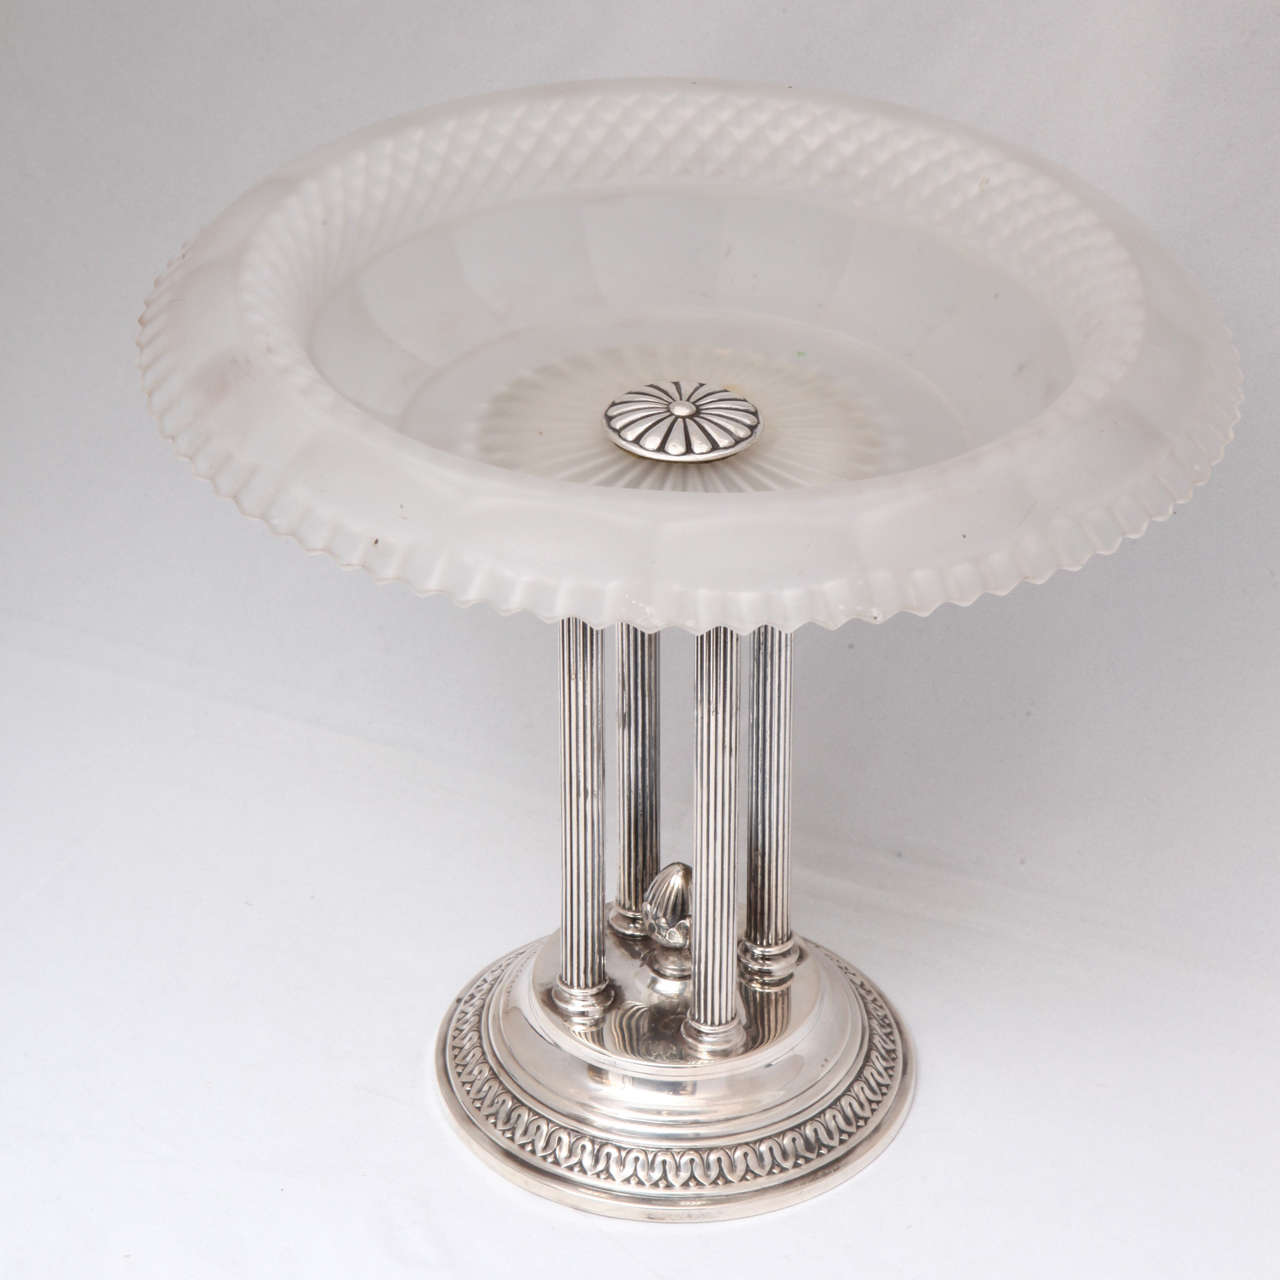 Continental silver (.800) centrepiece with stepped up base, Germany, circa 1900. Frosted bowl is mounted on four Corinthian columns or pillars. Lovely design on base and on tops of columns. Over 9 3/4